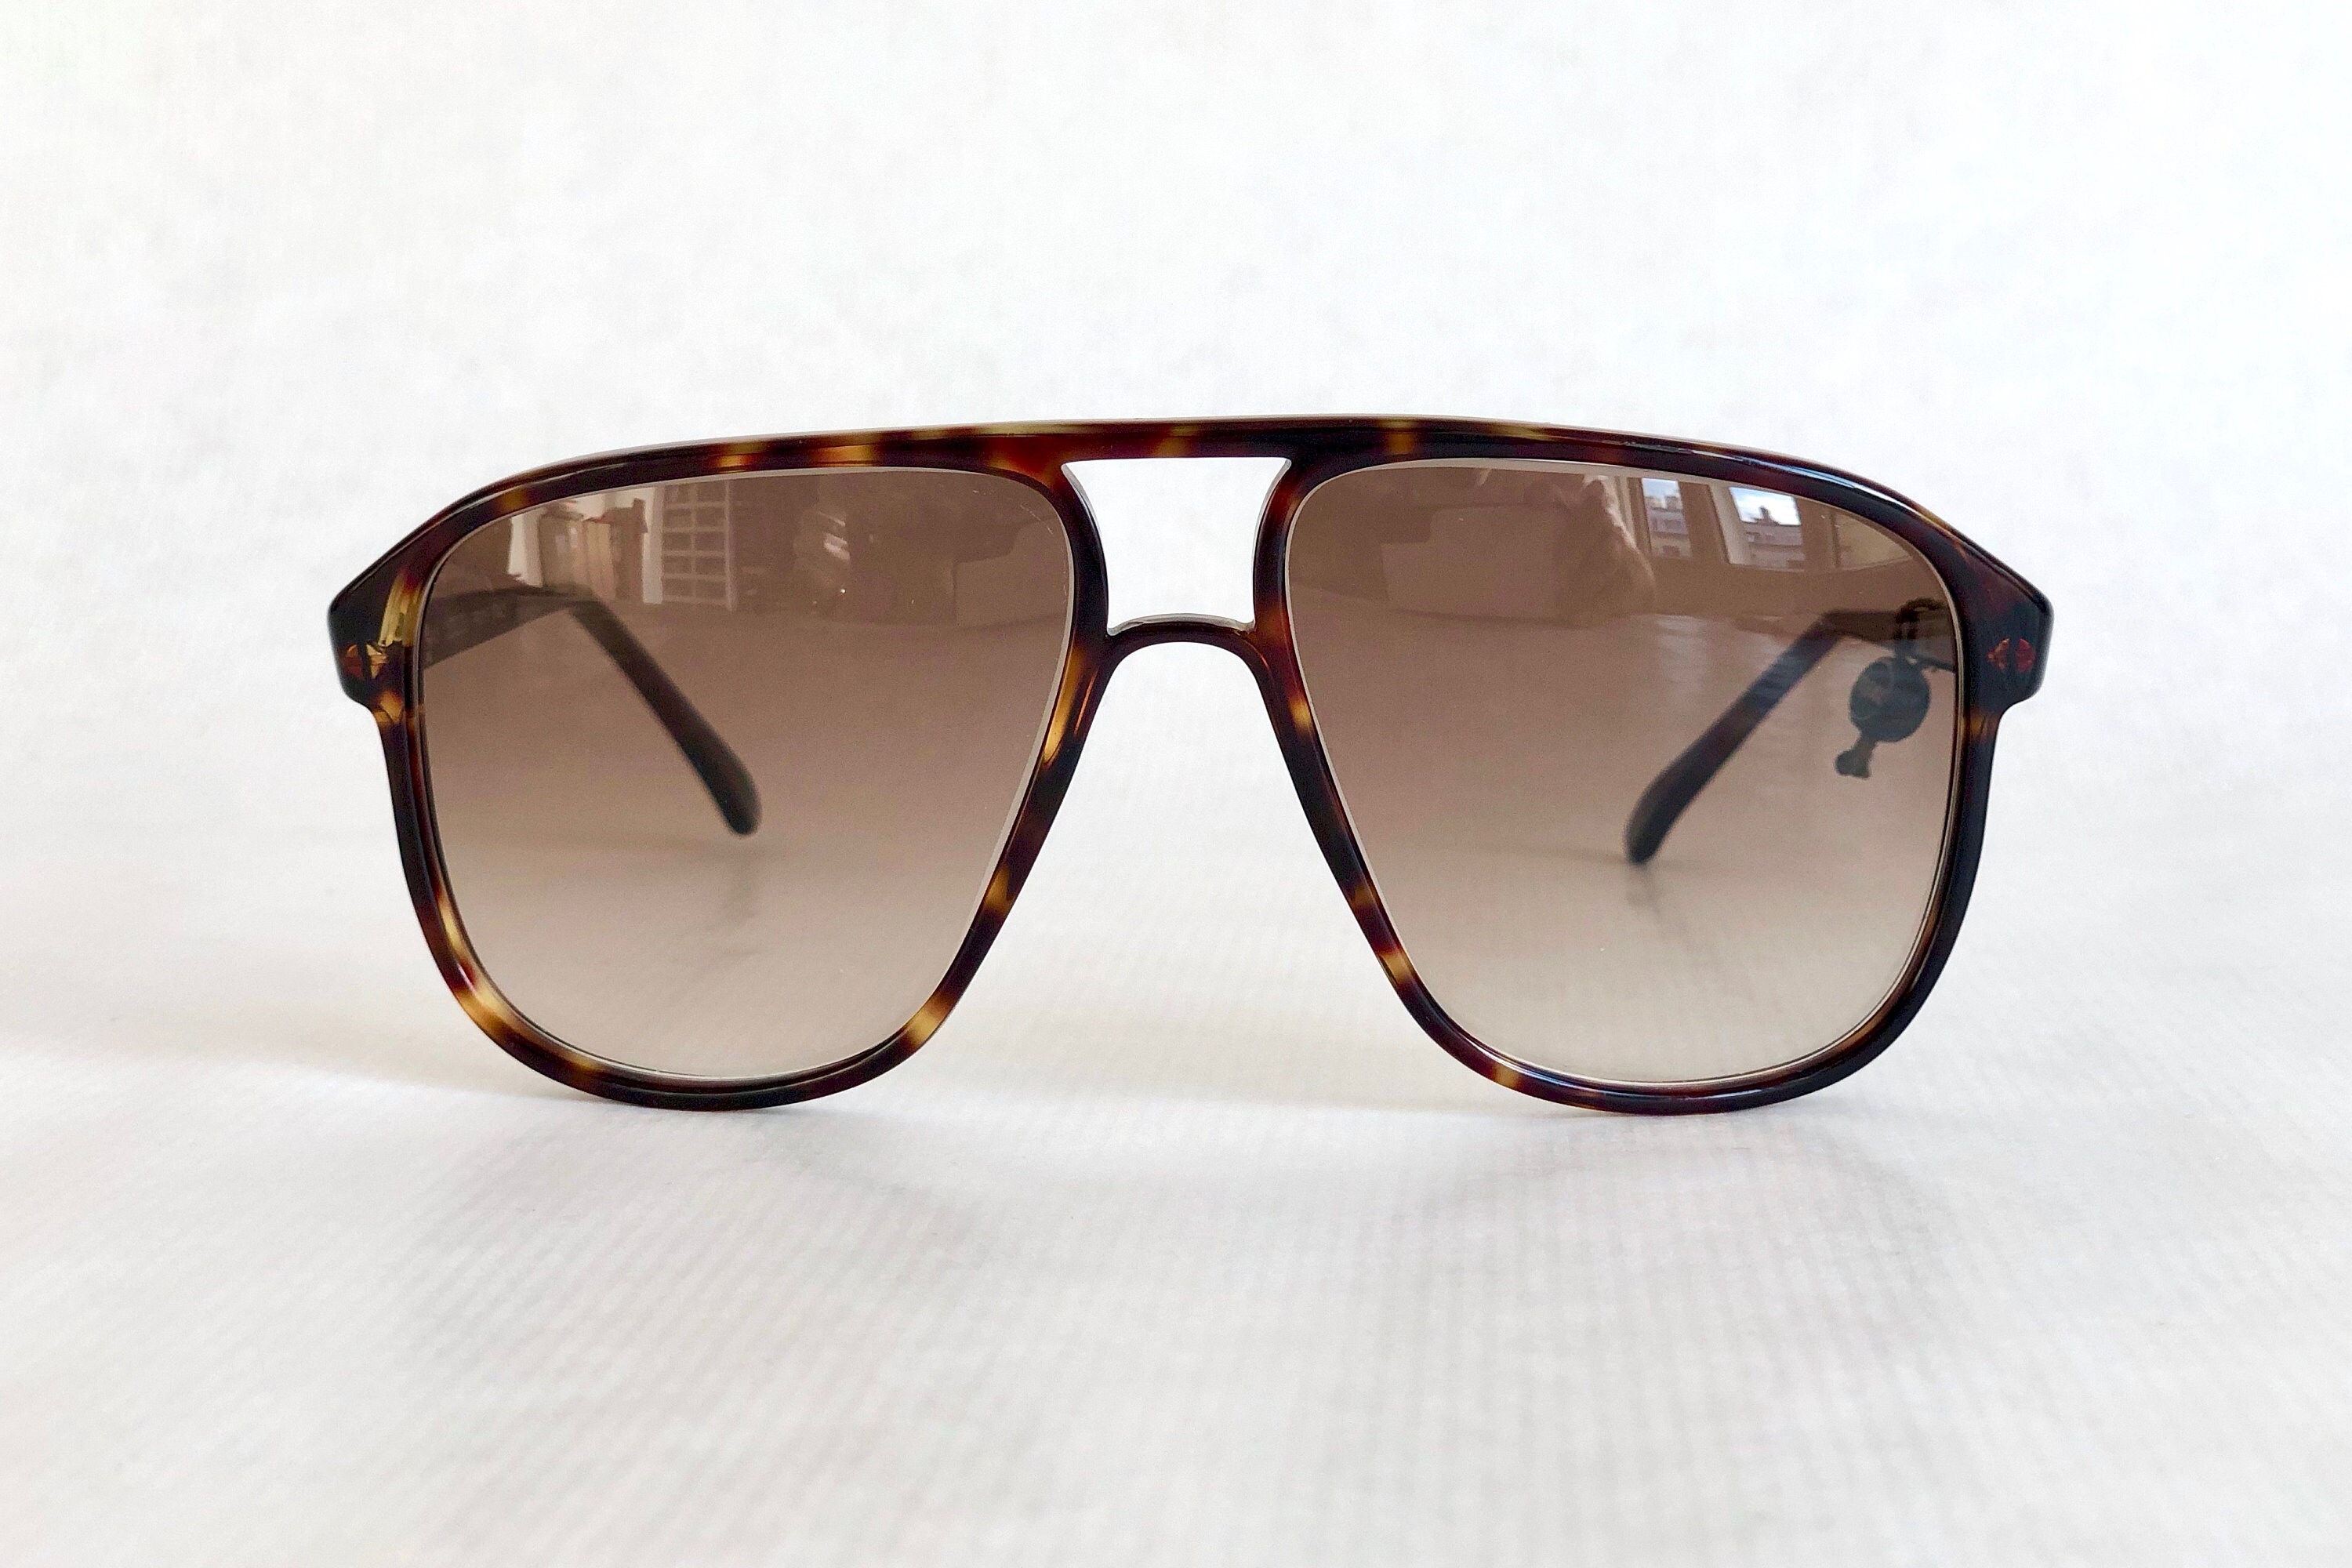 Lozza N42 Vintage Sunglasses – New Old Stock – Made in Italy